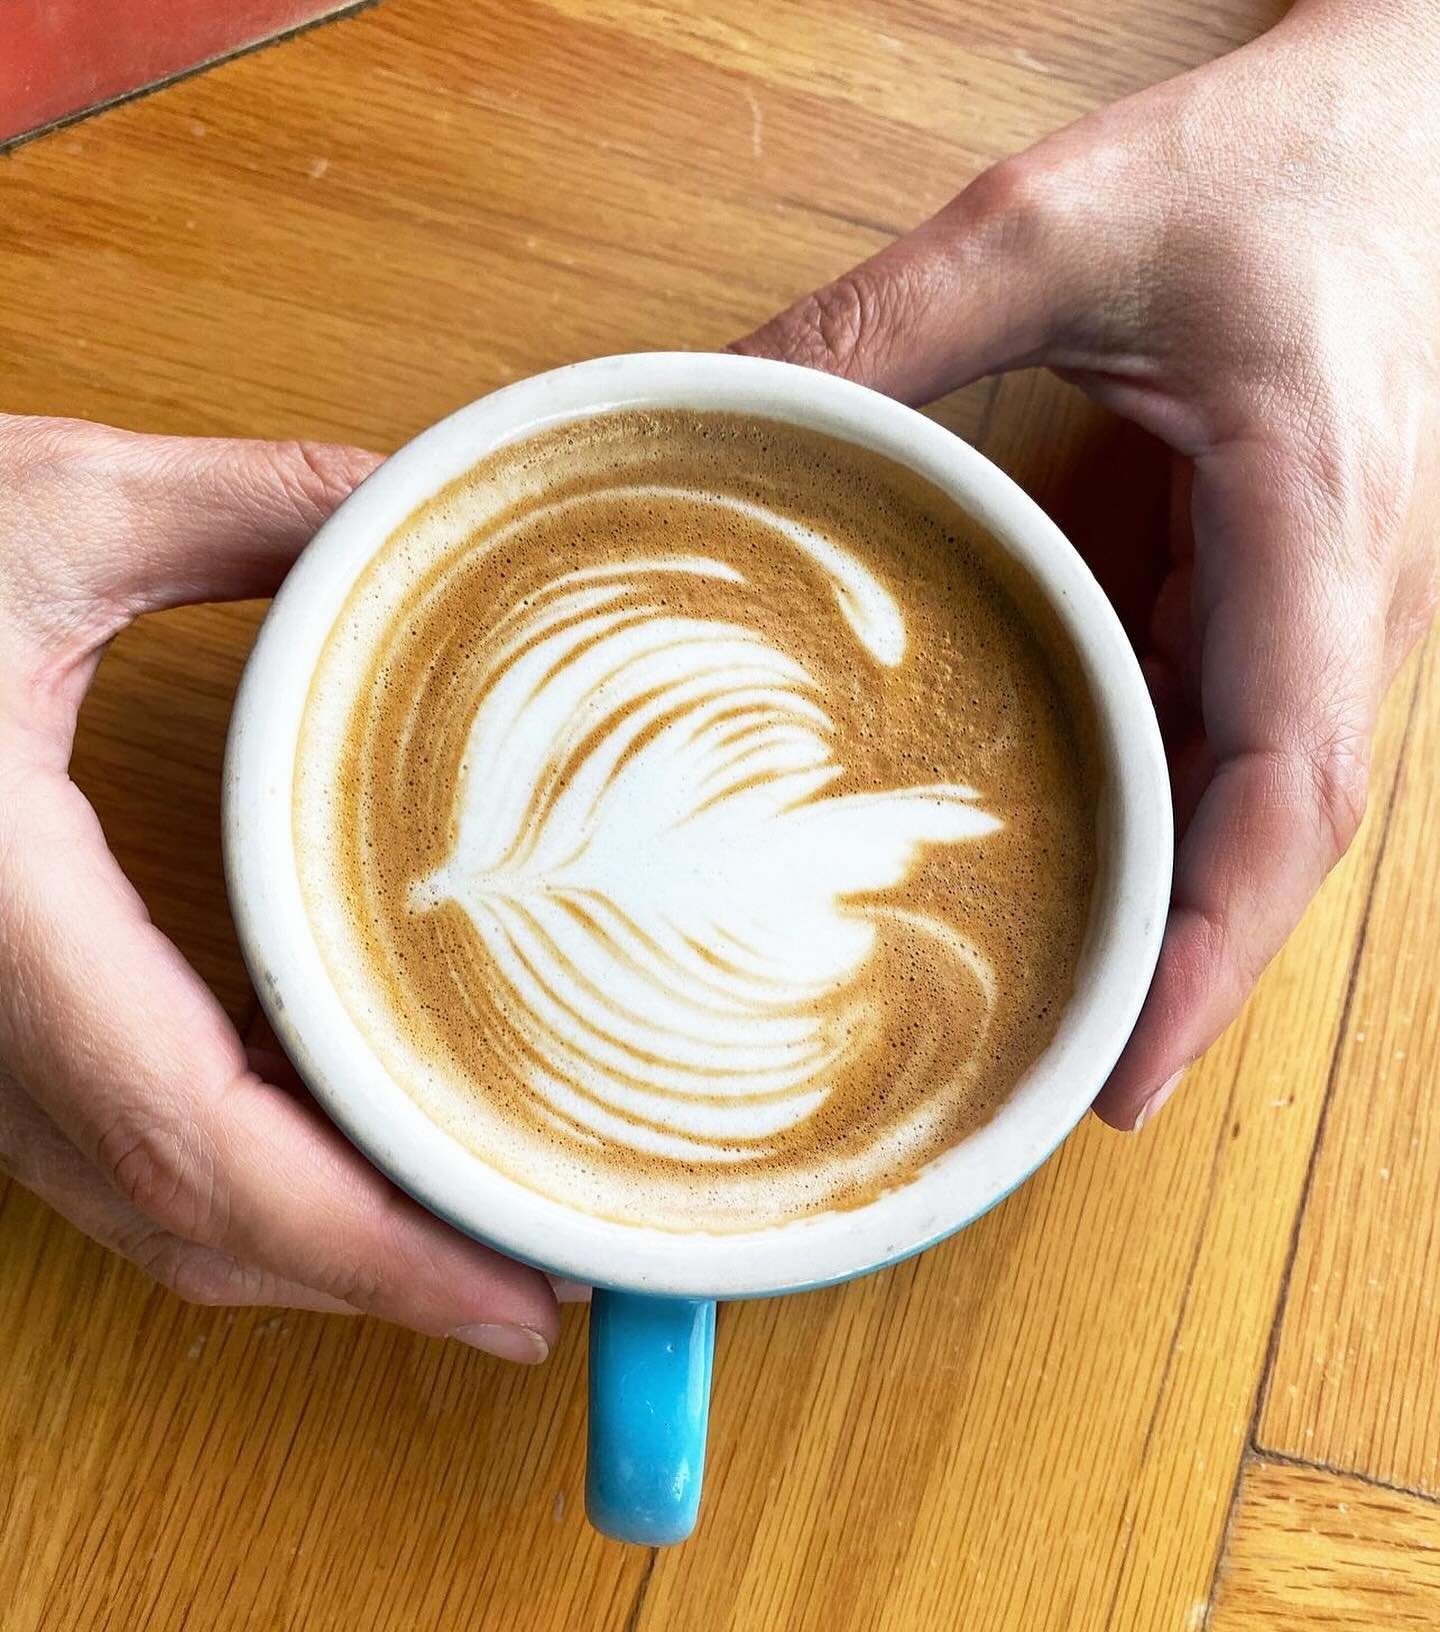 Feeling that midweek slump? Let us lift your spirits with great food, vibes, coffees and cocktails. You know we love you a latte. ☕️ ❤️